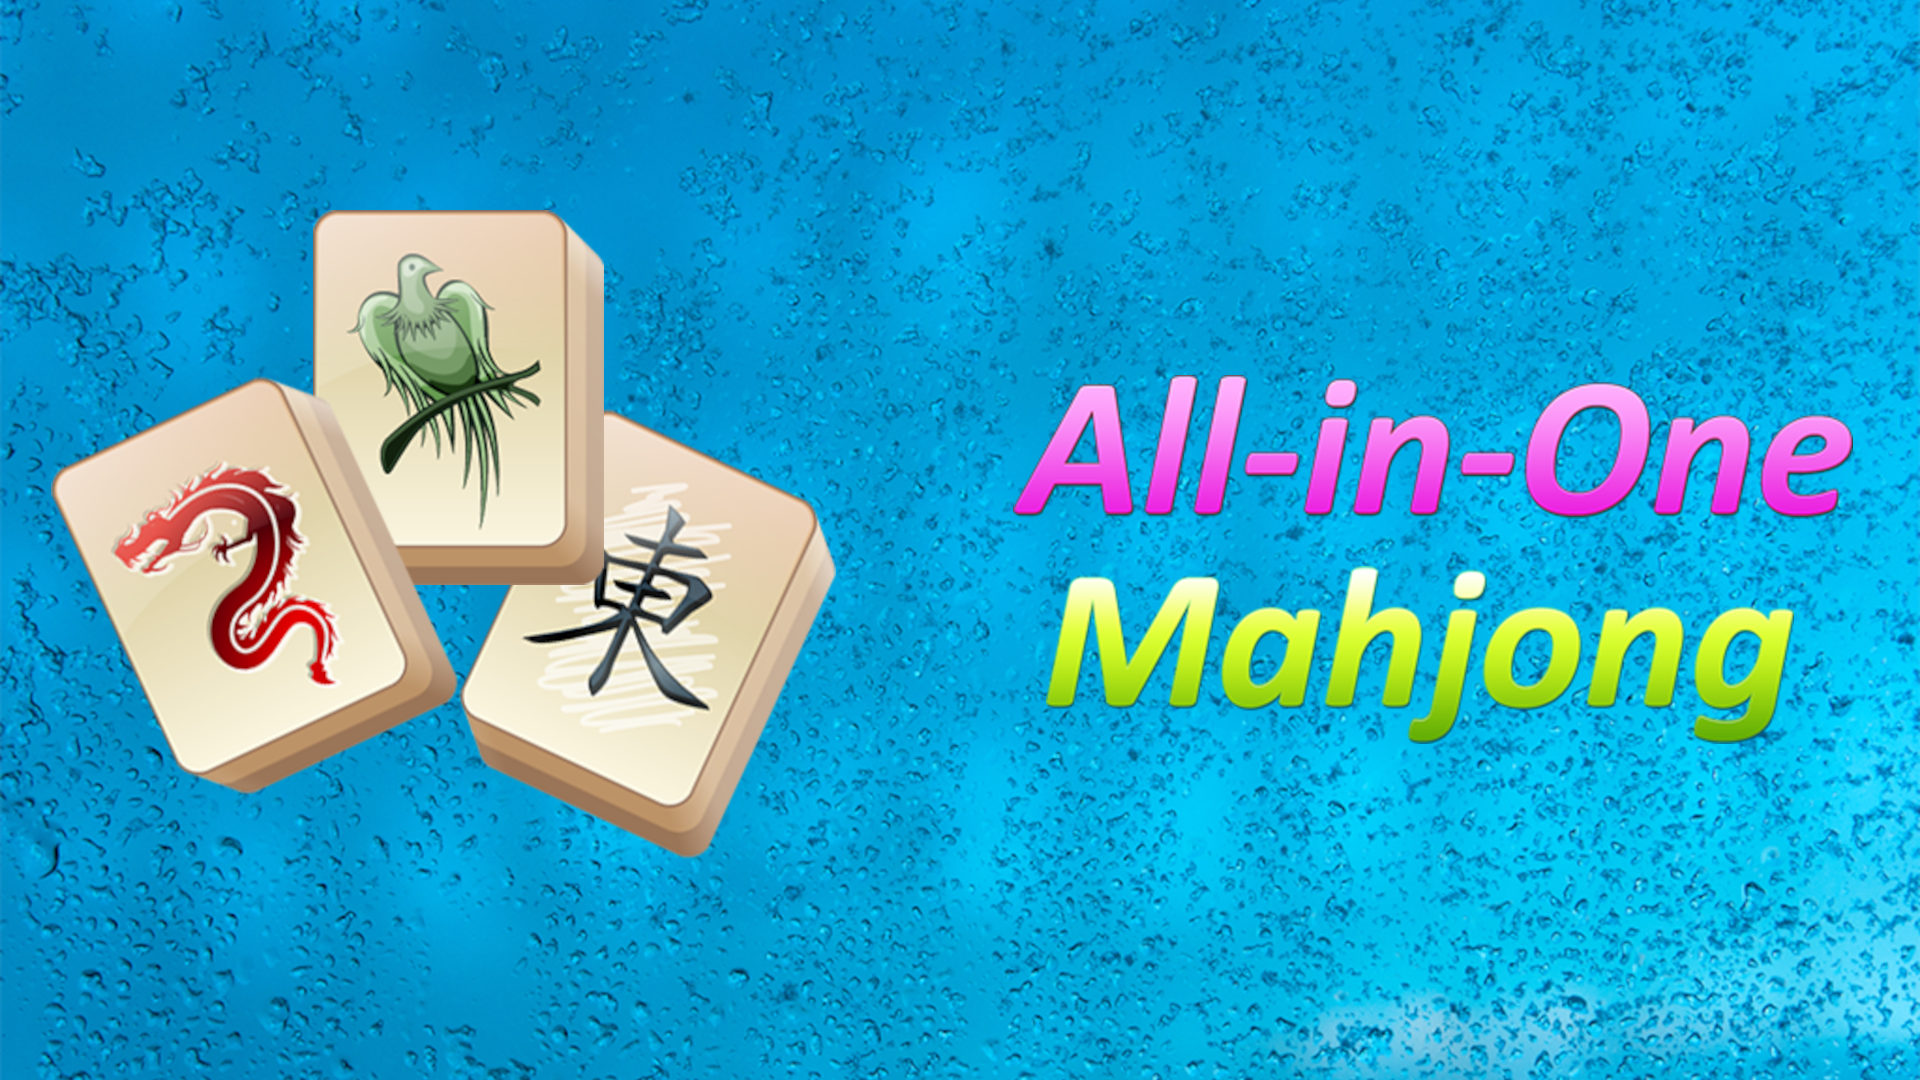 Mahjong Solitaire - FREE - Microsoft Apps